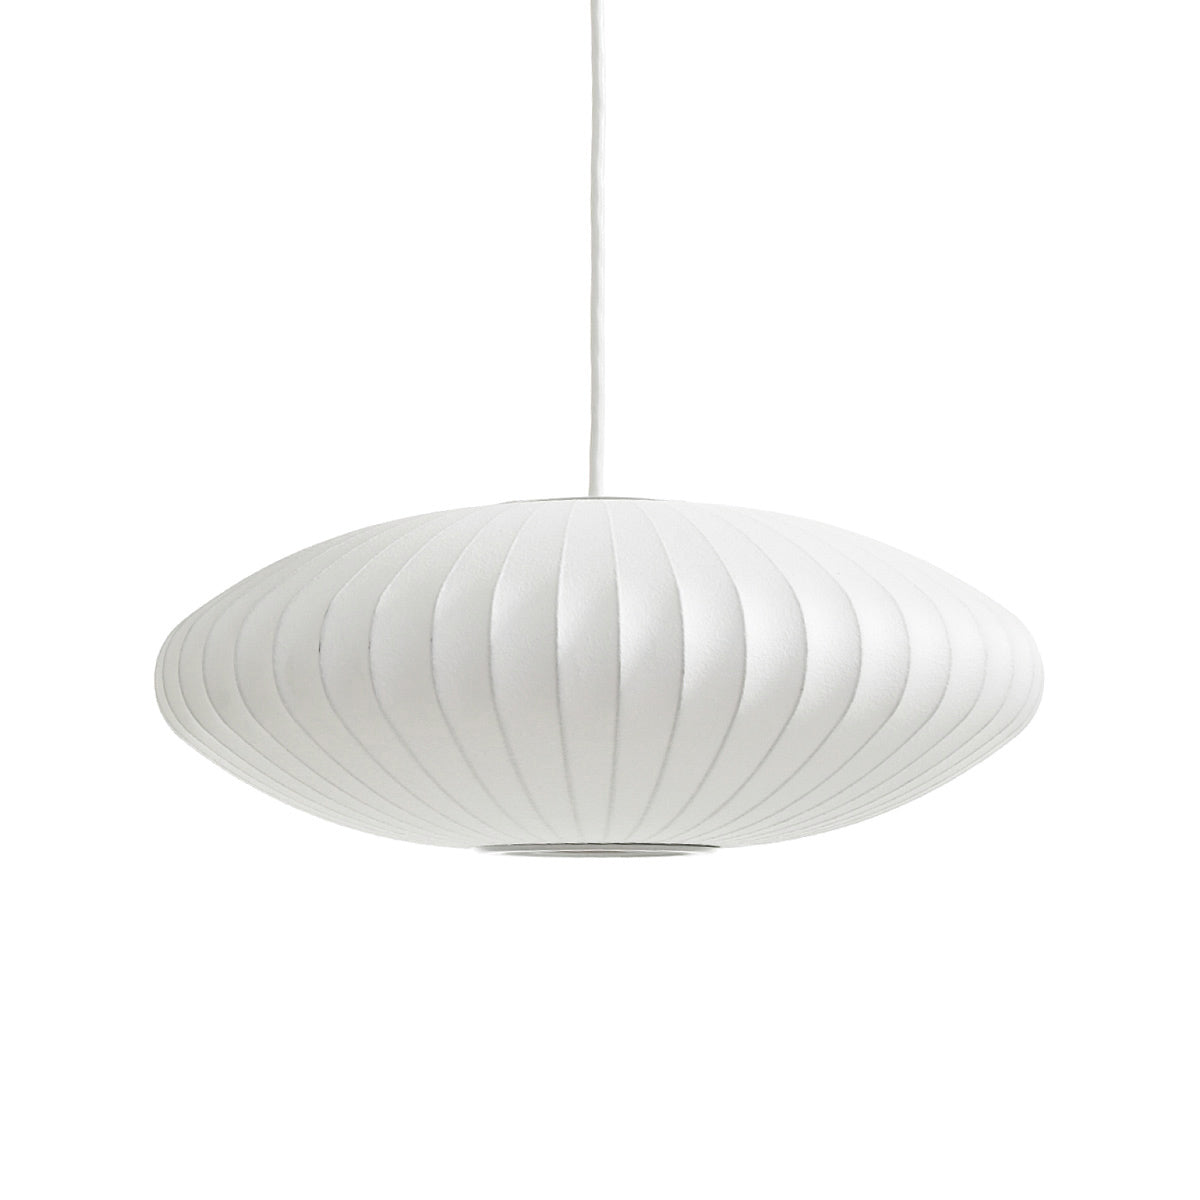 nelson-bubble-lamp-saucer-george-nelson-modernica-260